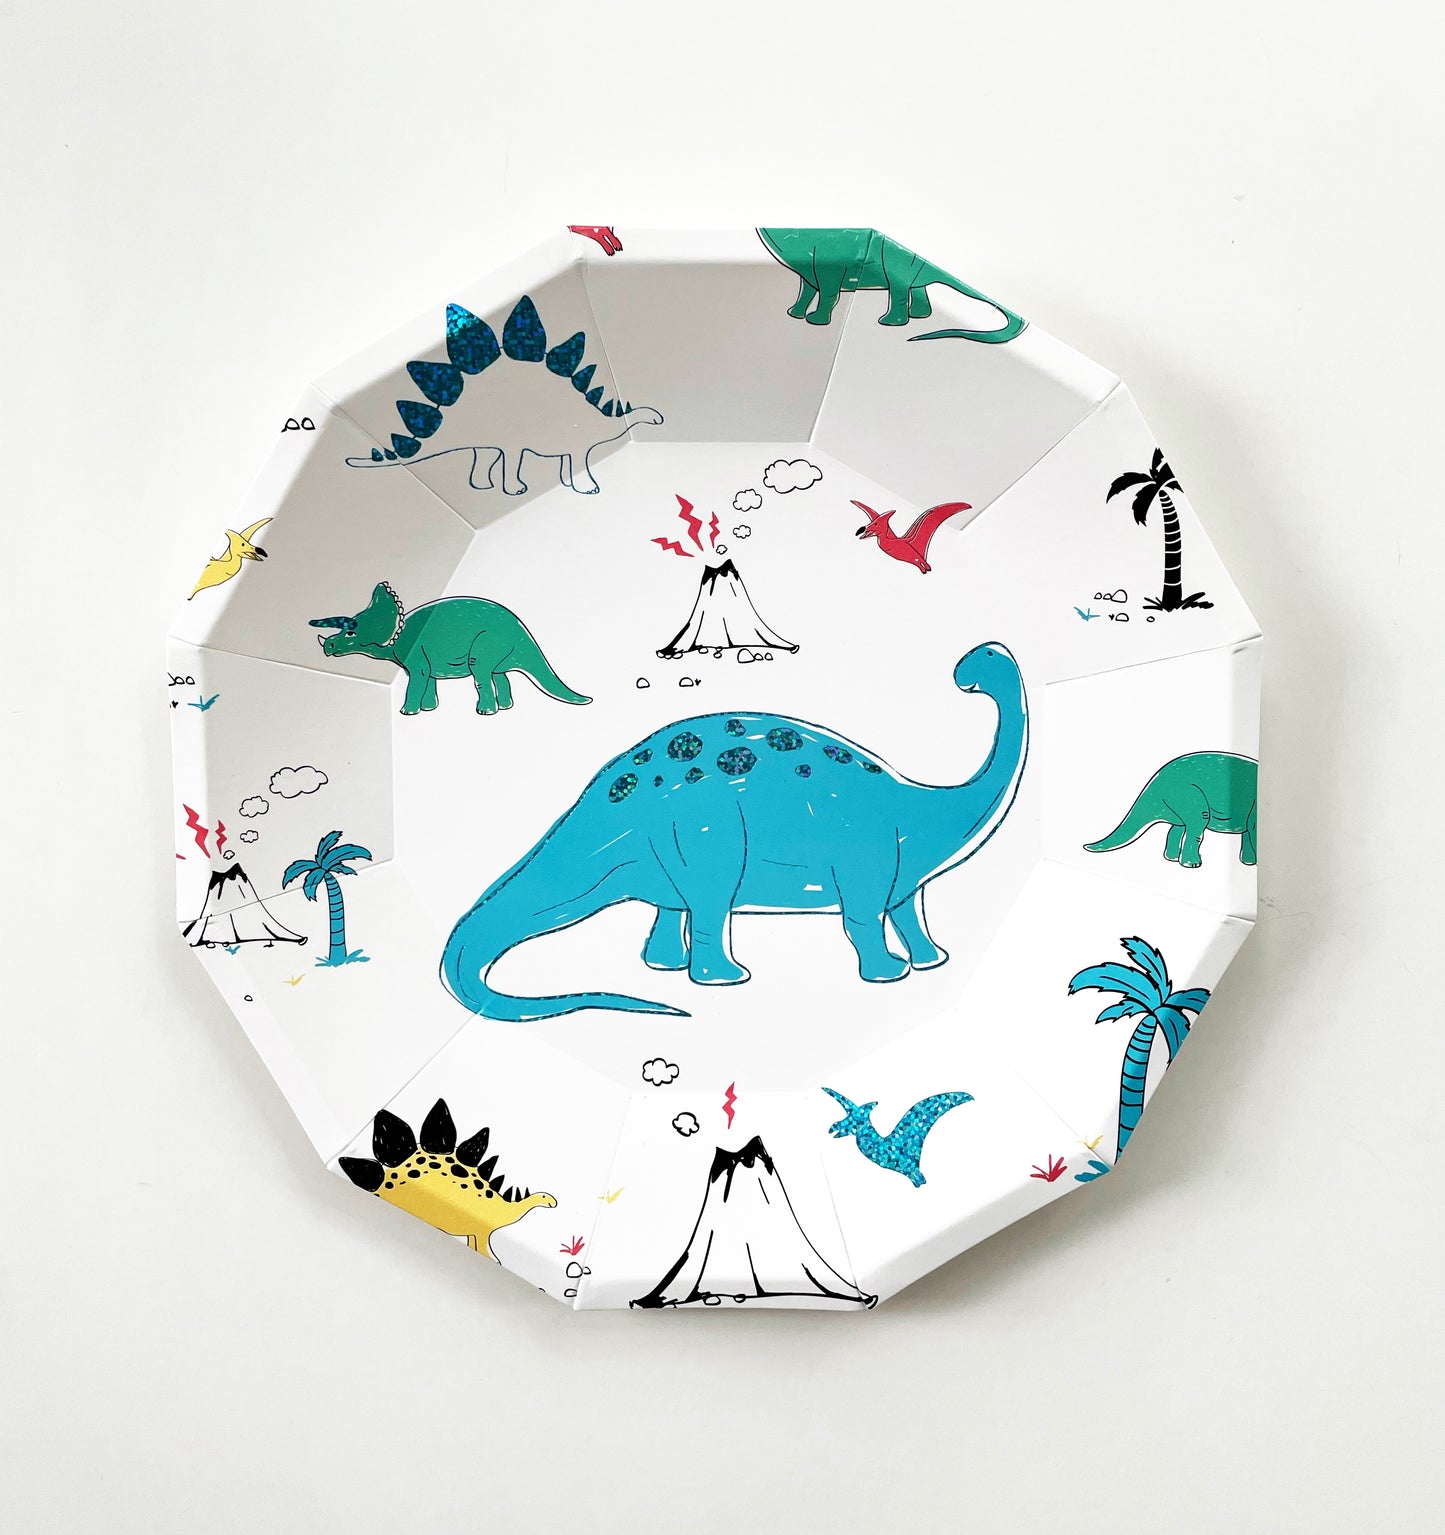 The small paper party plate dinosaur pattern features green, blue, yellow and red dinosaurs, volcanoes and palm trees. The party plates feature blue metallic elements, and are in the shape of a dodecagon.